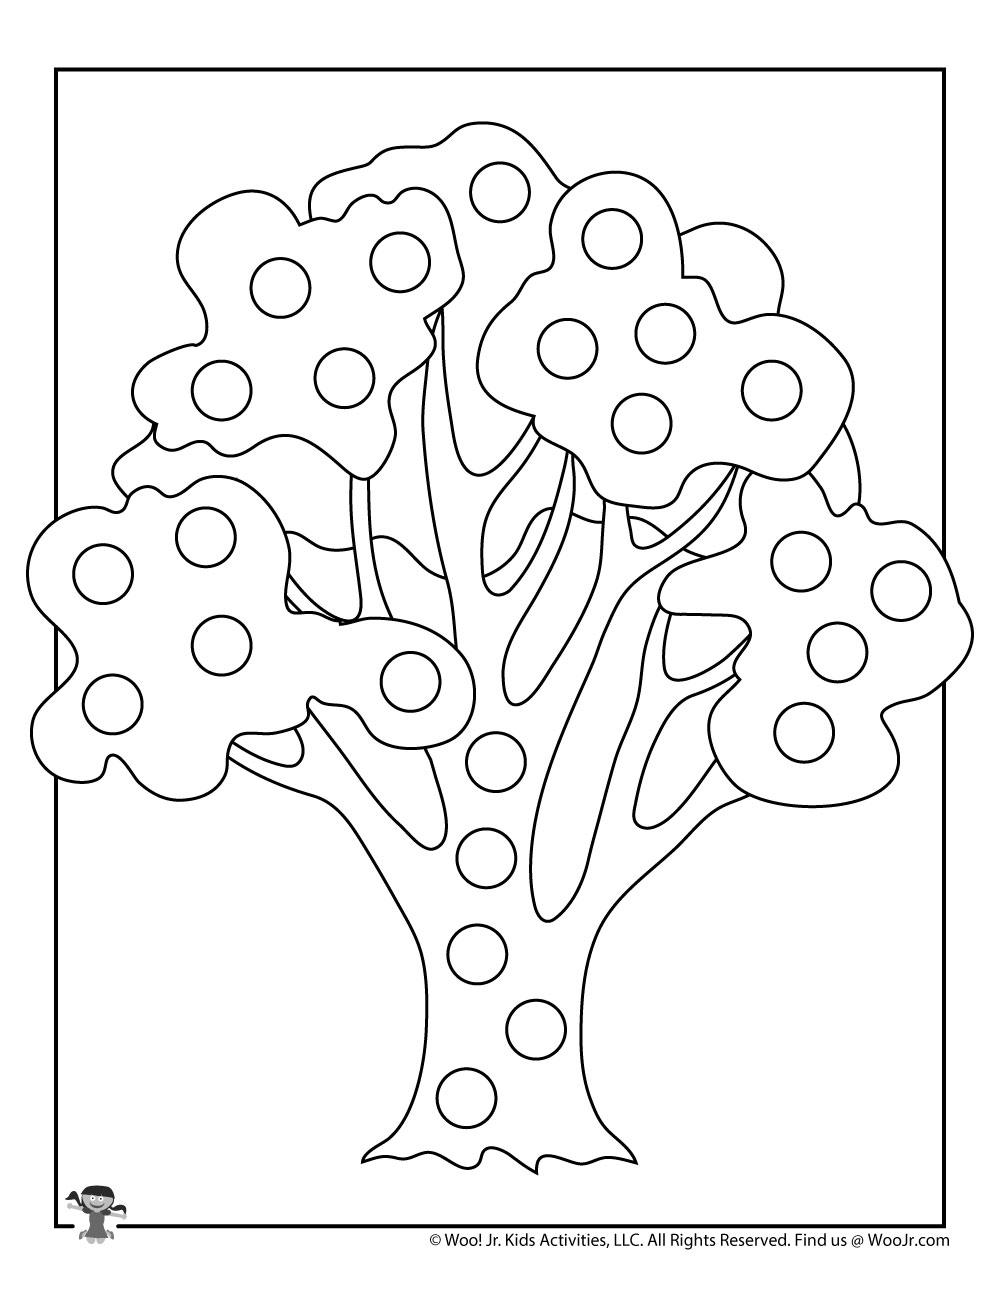 Fall Apple Tree Do a Dot Coloring Page | Woo! Jr. Kids Activities :  Children's Publishing